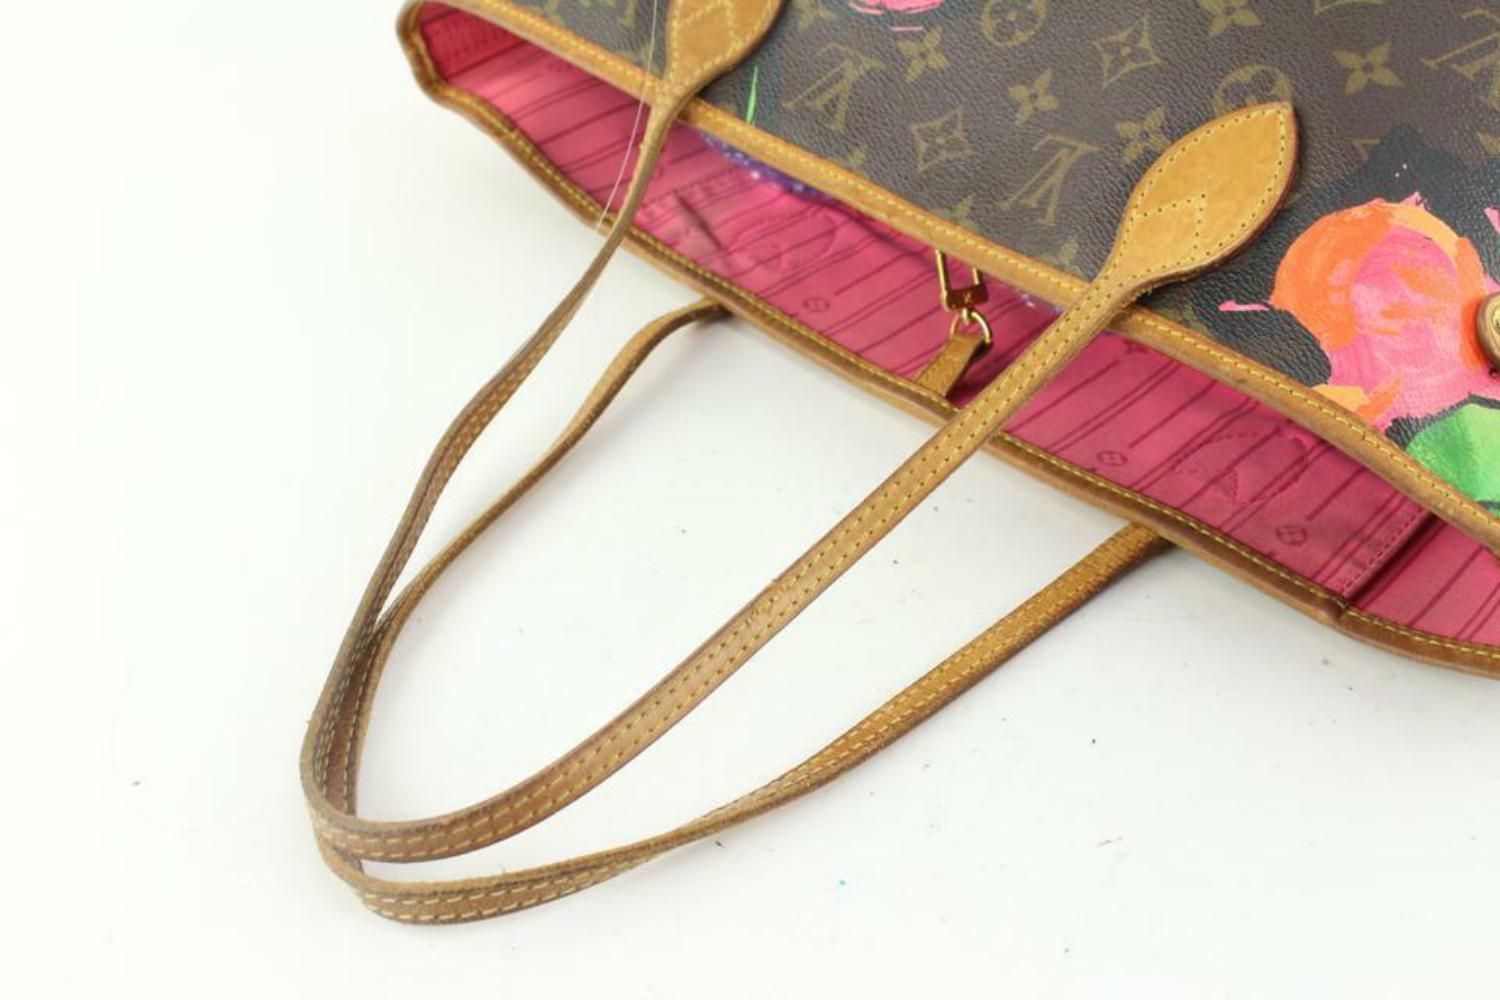 Louis Vuitton Stephen Sprouse Monogram Roses Neverfull MM Tote Bag 15LV118 For Sale 1